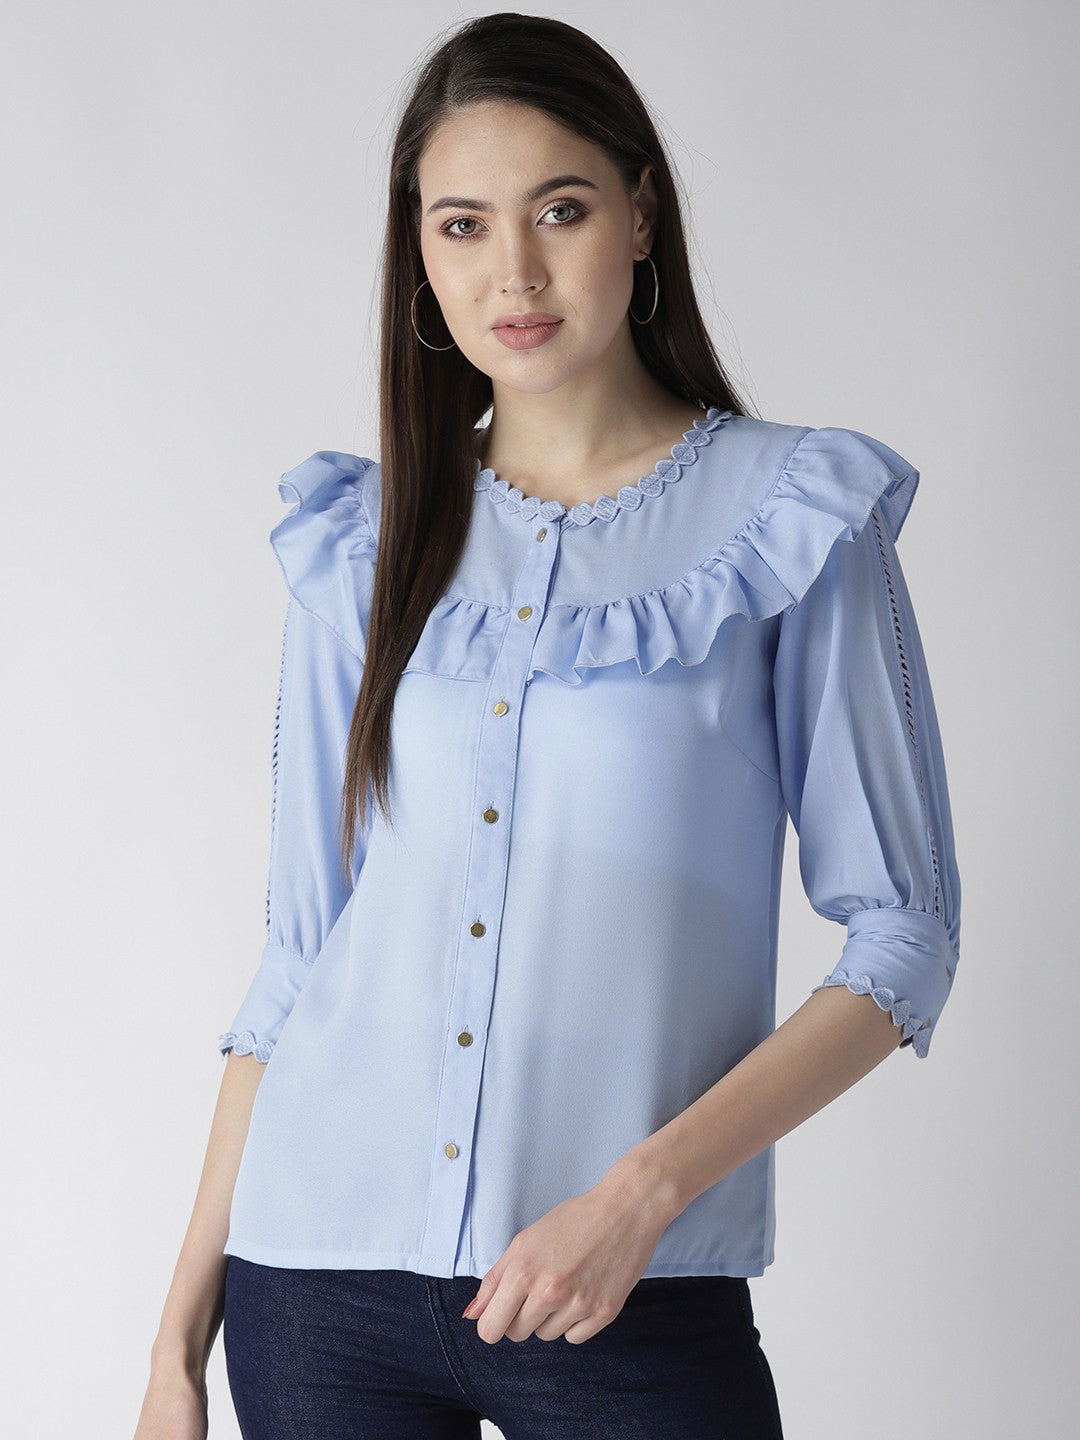 Blue Solid Shirt Style Top